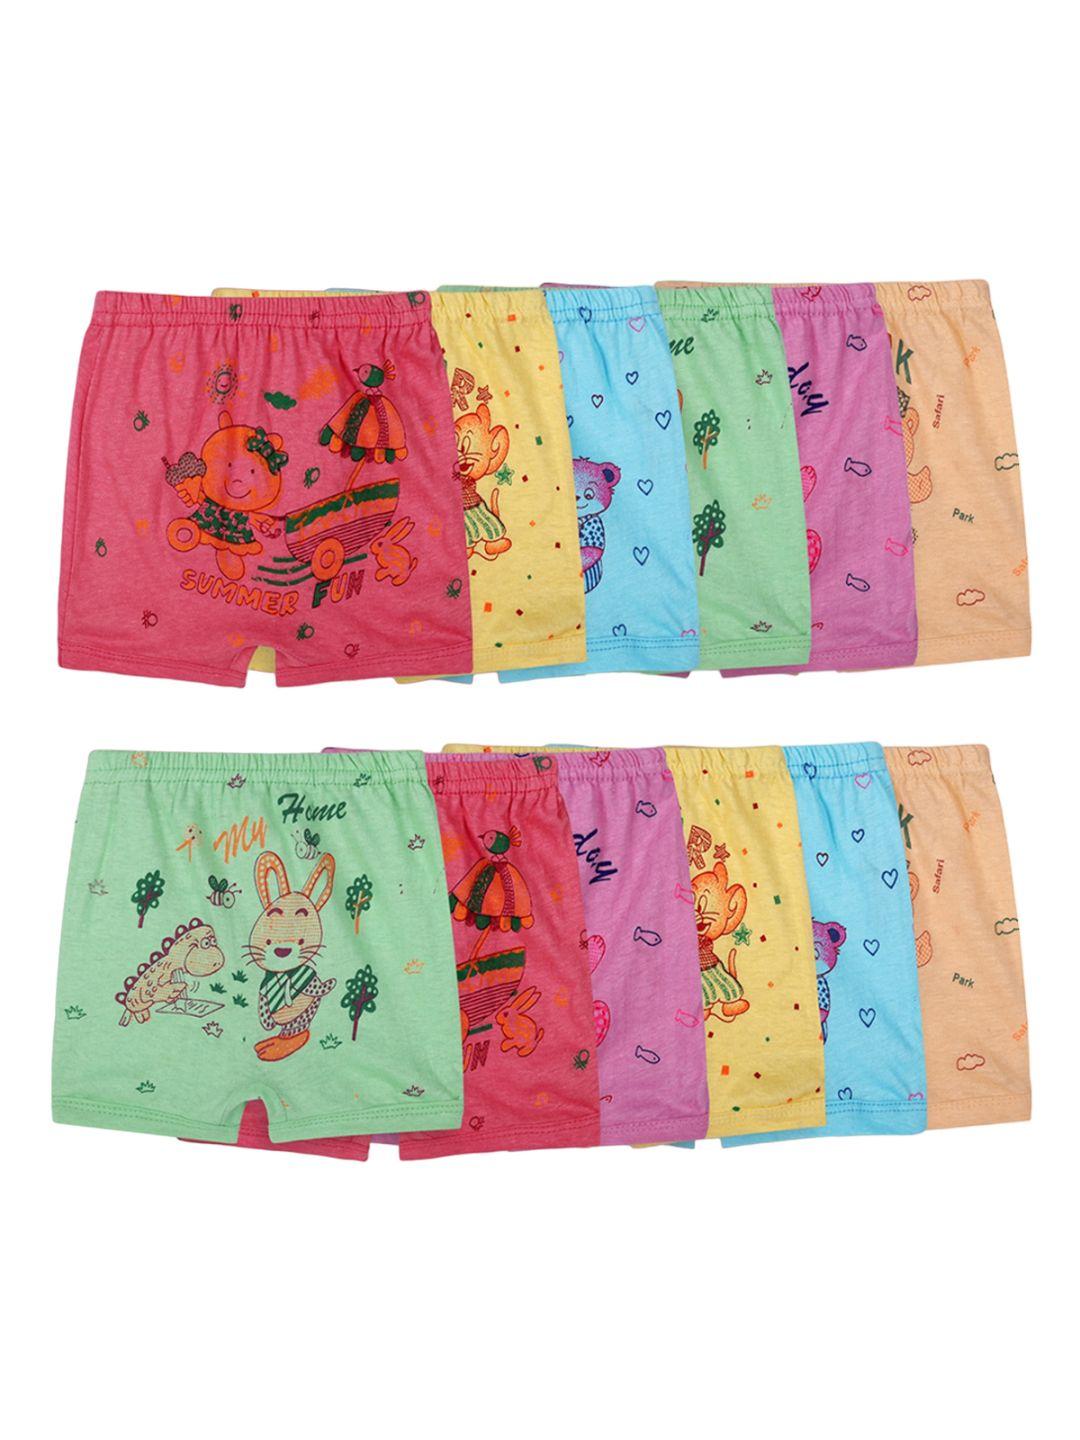 baesd kids pack of 12 conversational printed pure cotton boxer-style briefs